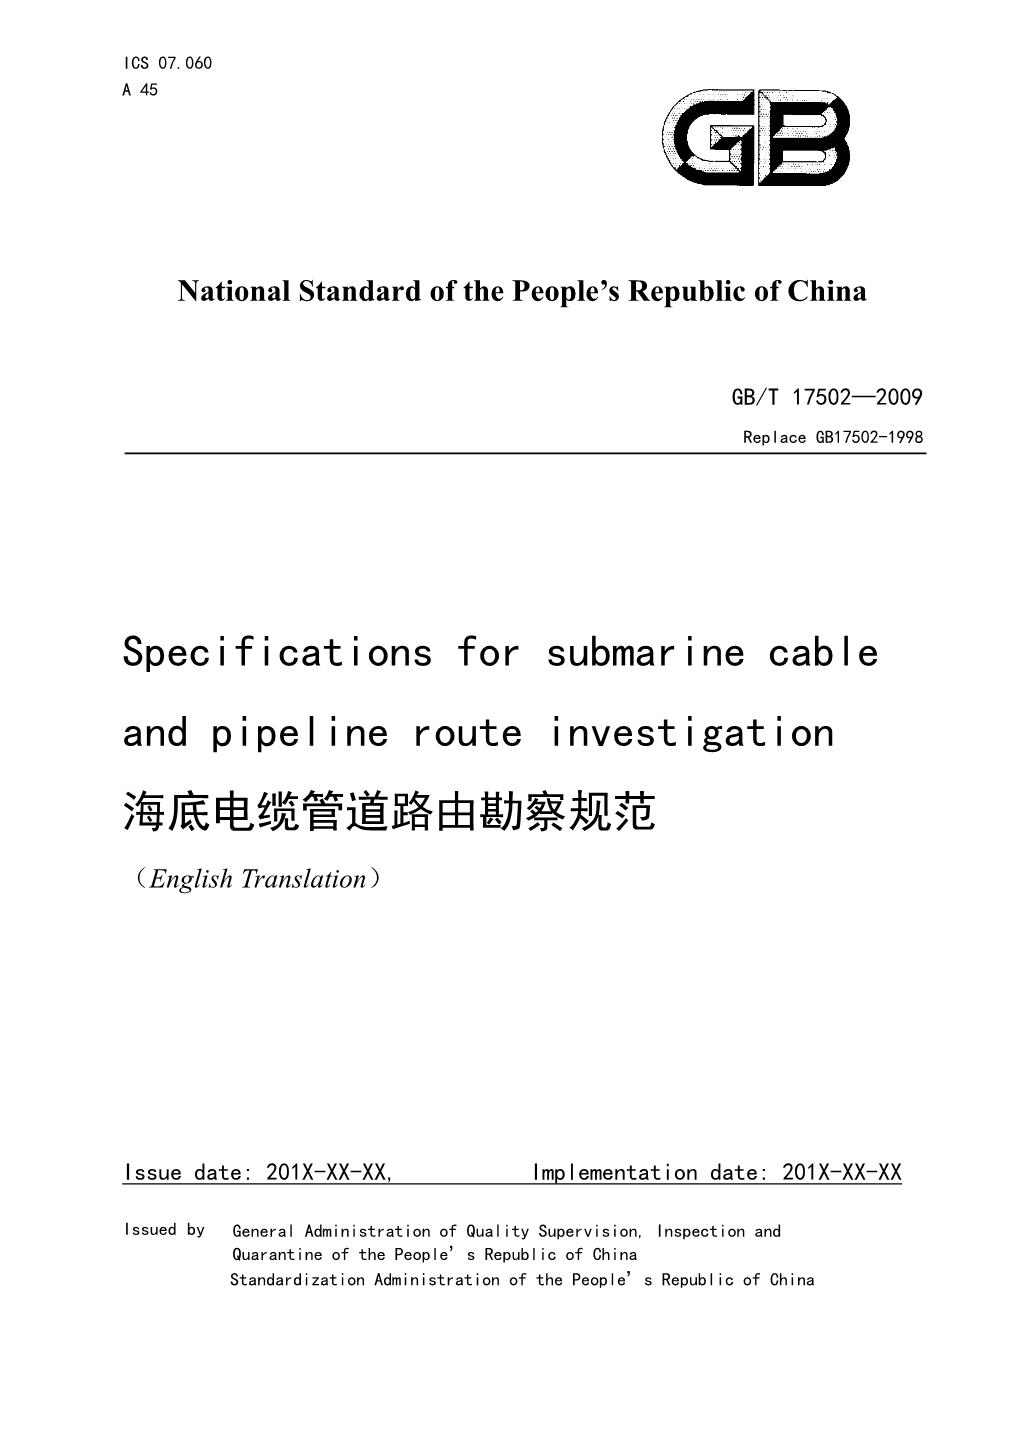 Specifications for Submarine Cable and Pipeline Route Investigation 海底电缆管道路由勘察规范